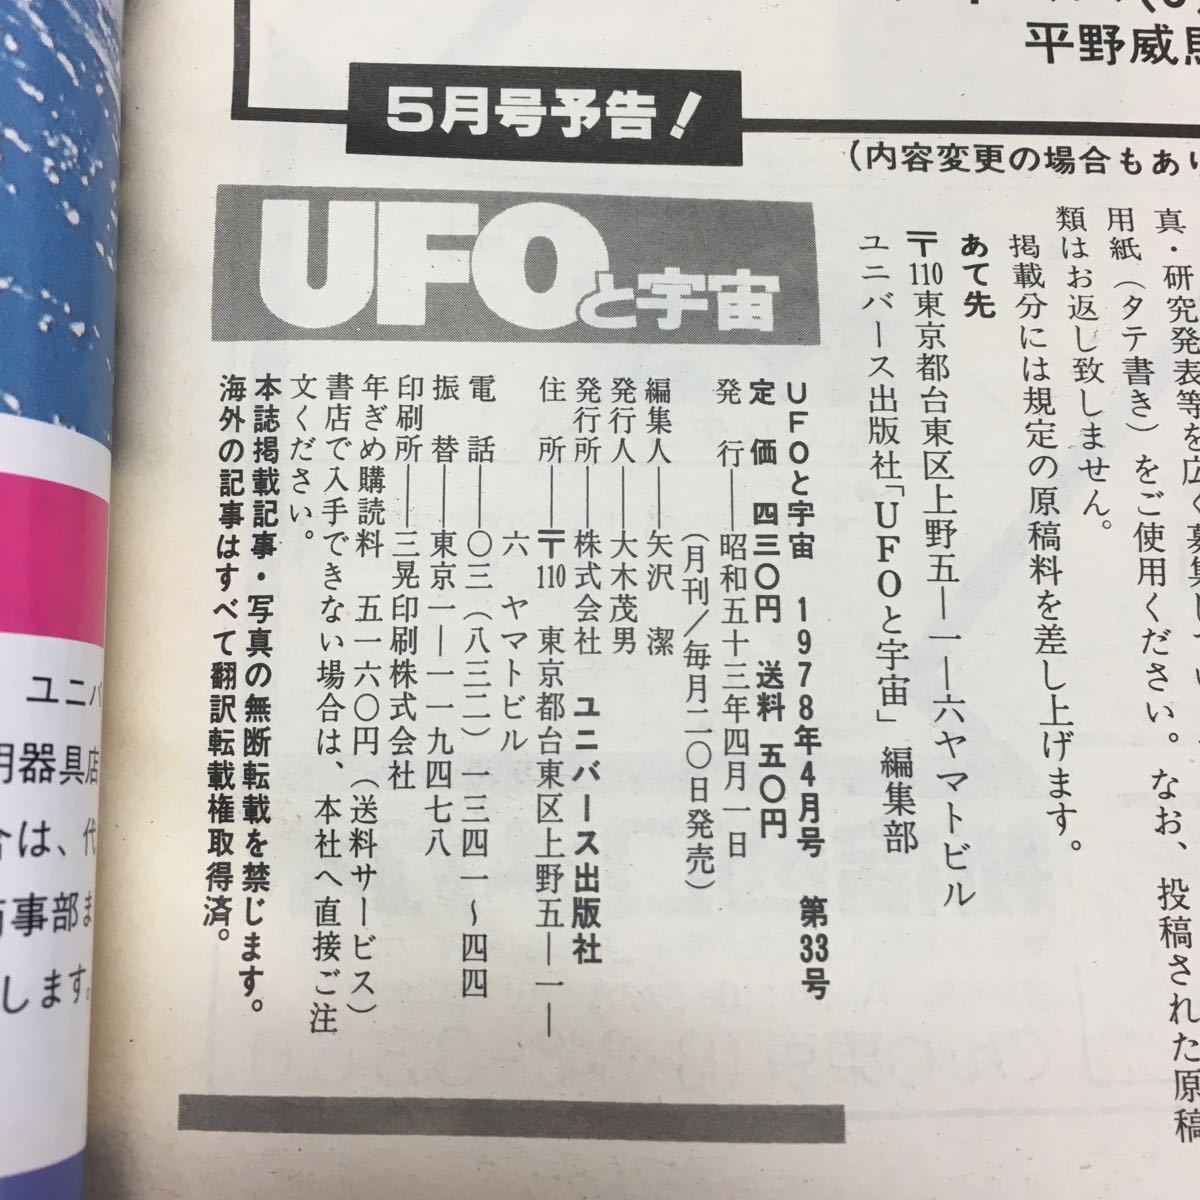 Y06-160 UFO. cosmos 1978/4 month number Showa era 58 year issue Universe publish company I extraterrestrial . saw! against .= width tail ..vs west circle .. UN total .UFO. opinion 